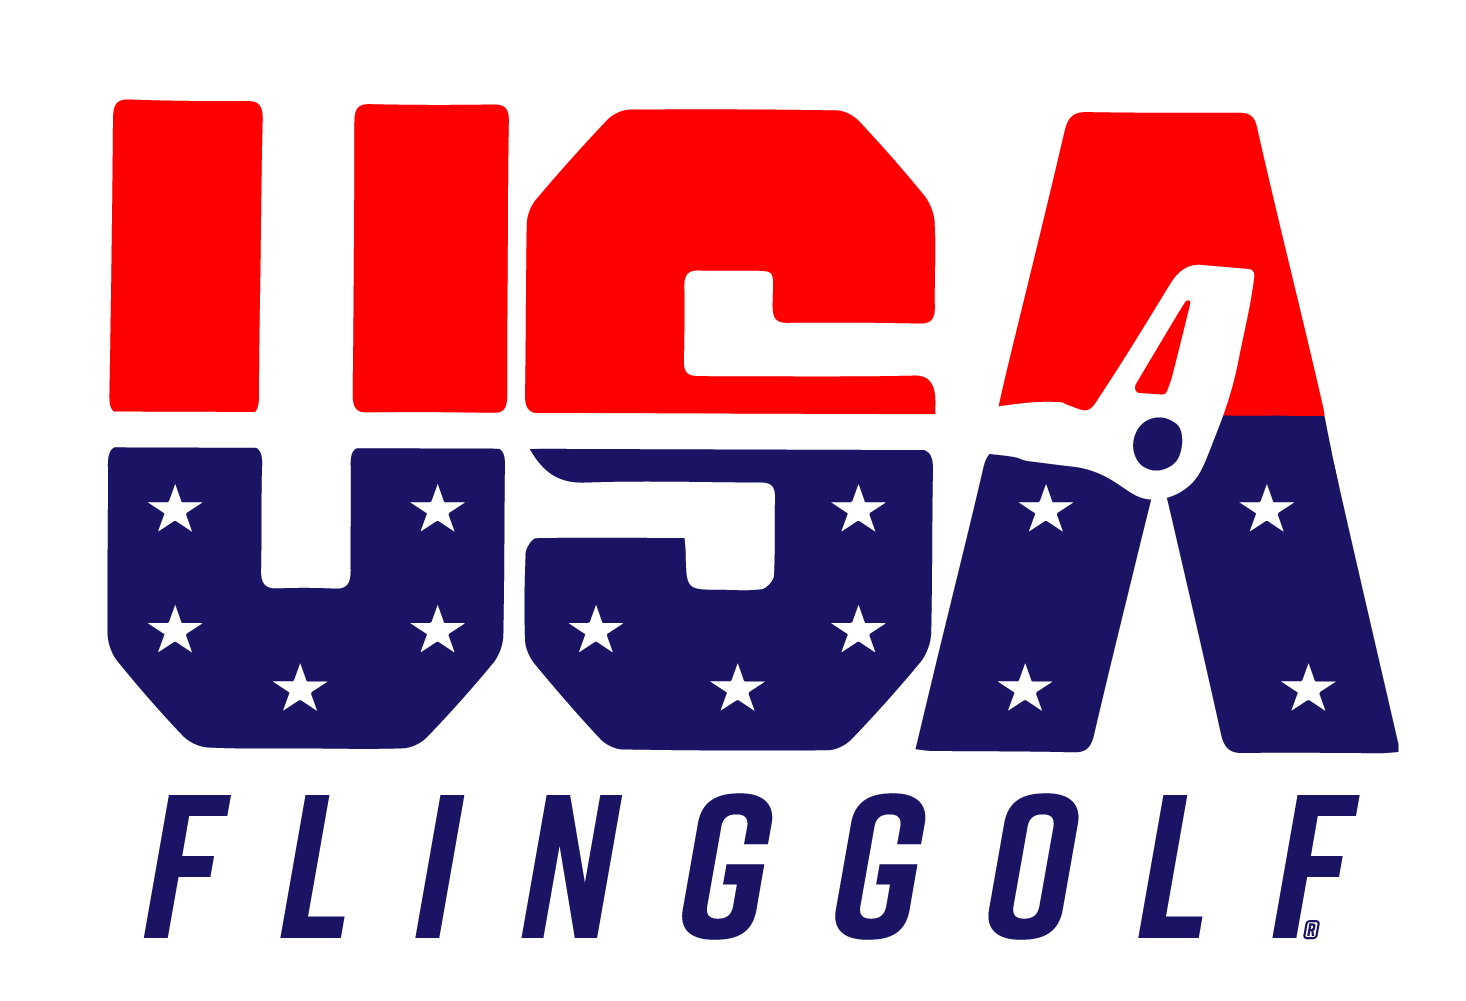 Support Team USA FlingGolf's Fight for the Inaugural Britain's Cup